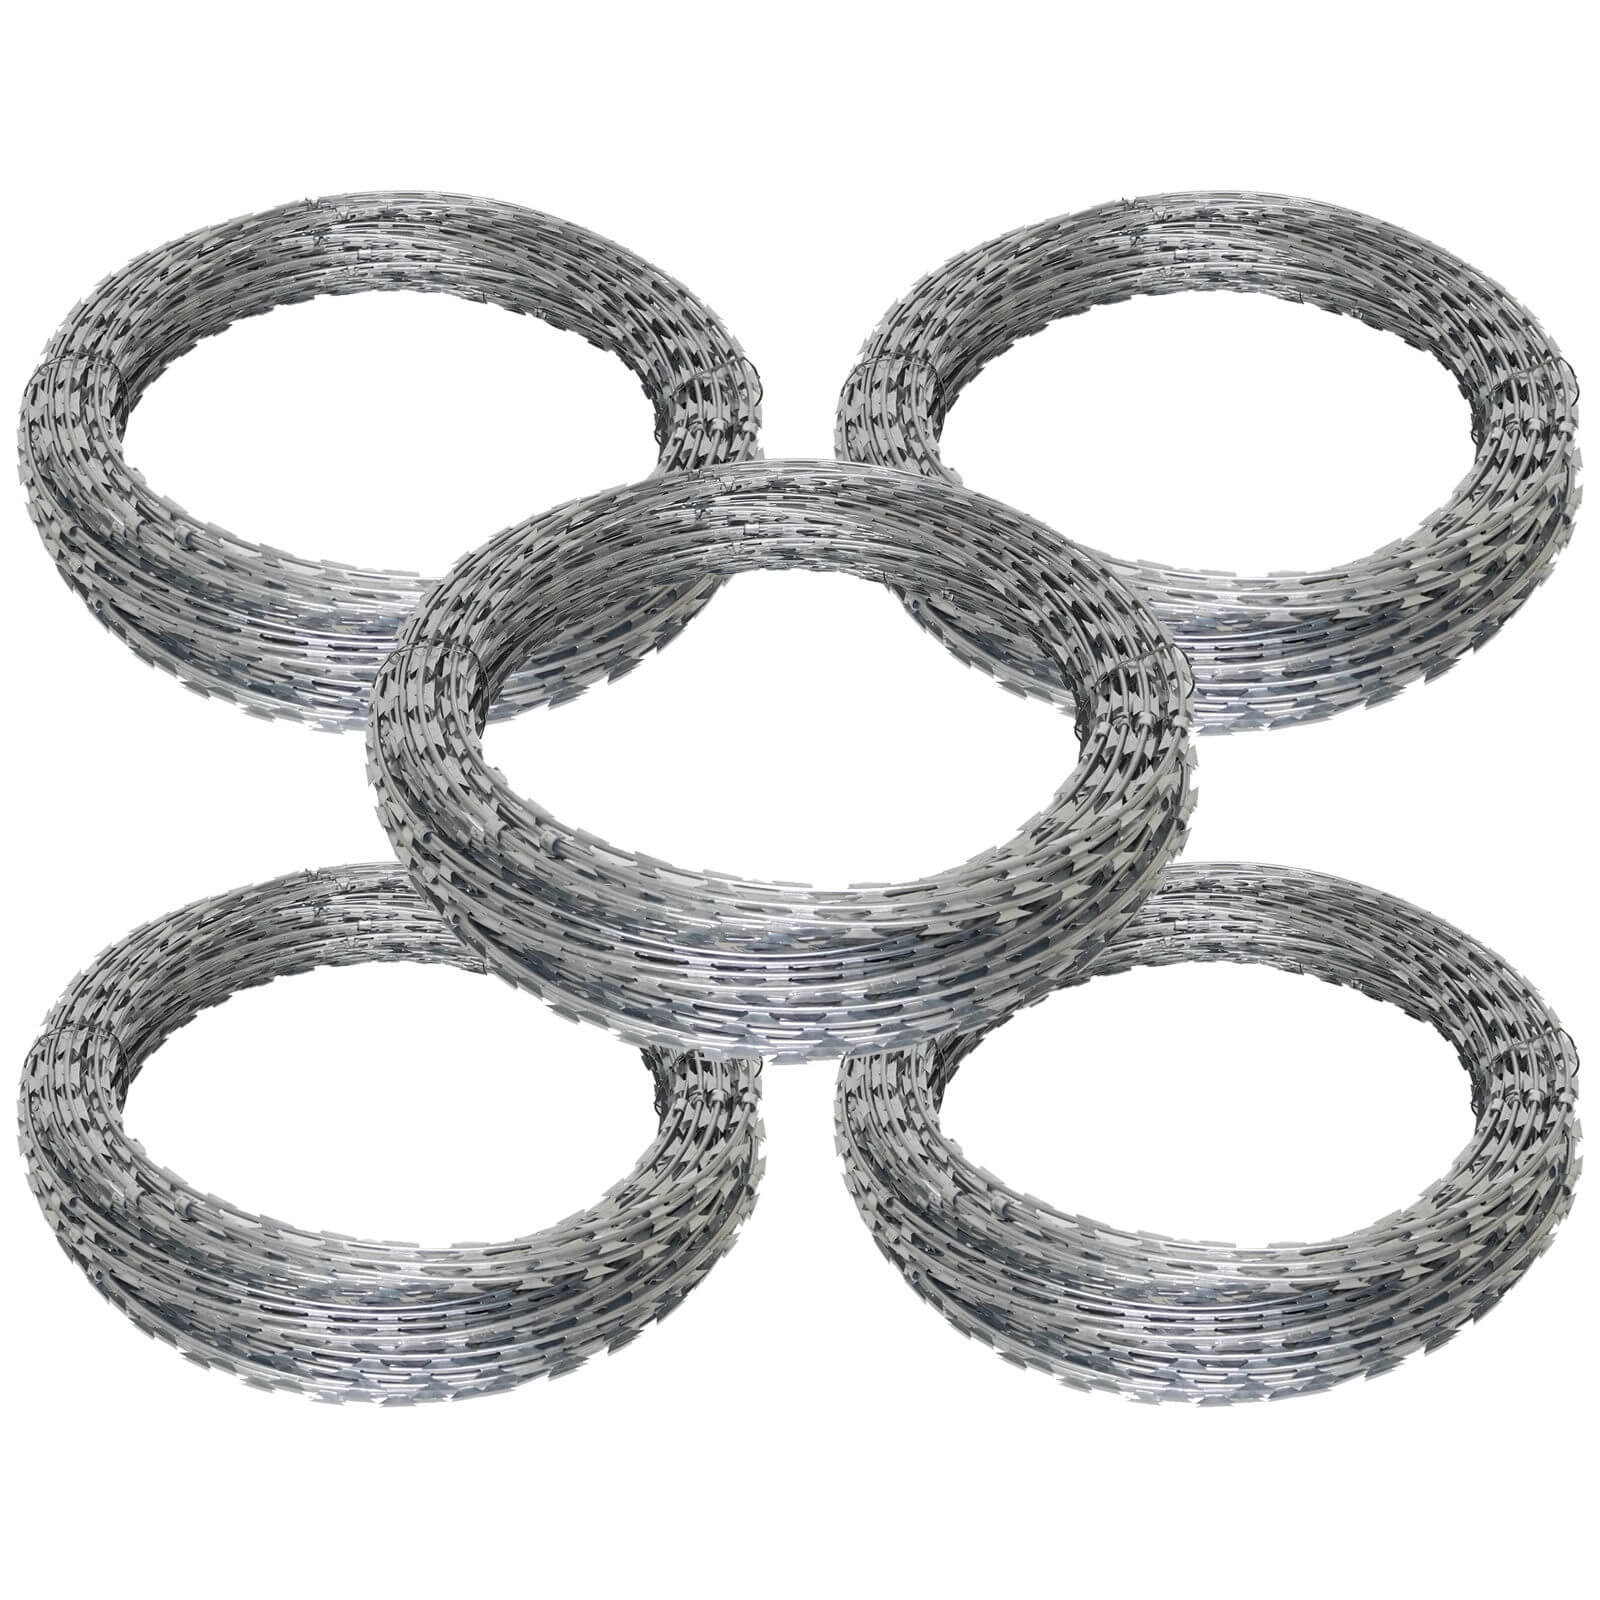 Razor Wire Fencing: Securing Perimeters with Style and Efficiency